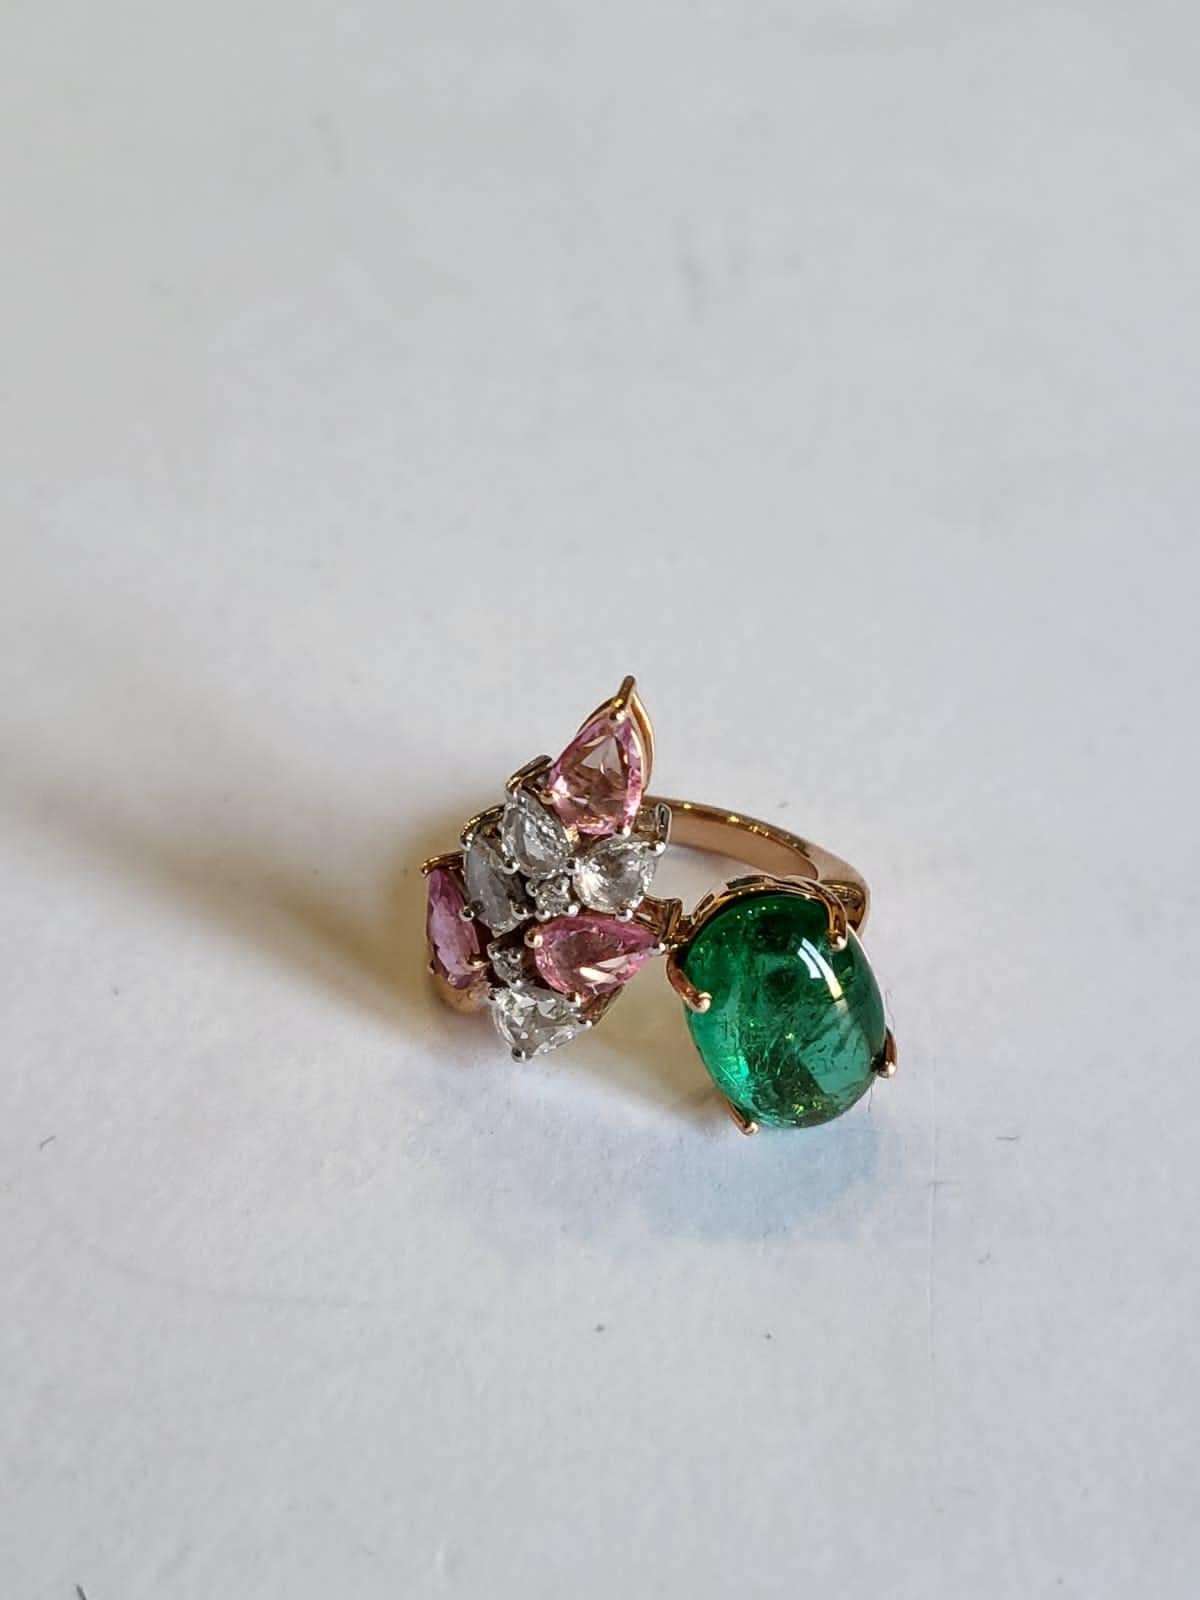 4.27 carats Zambian Emerald Cabochon, Pink Sapphires & Diamonds Cocktail Ring For Sale 1